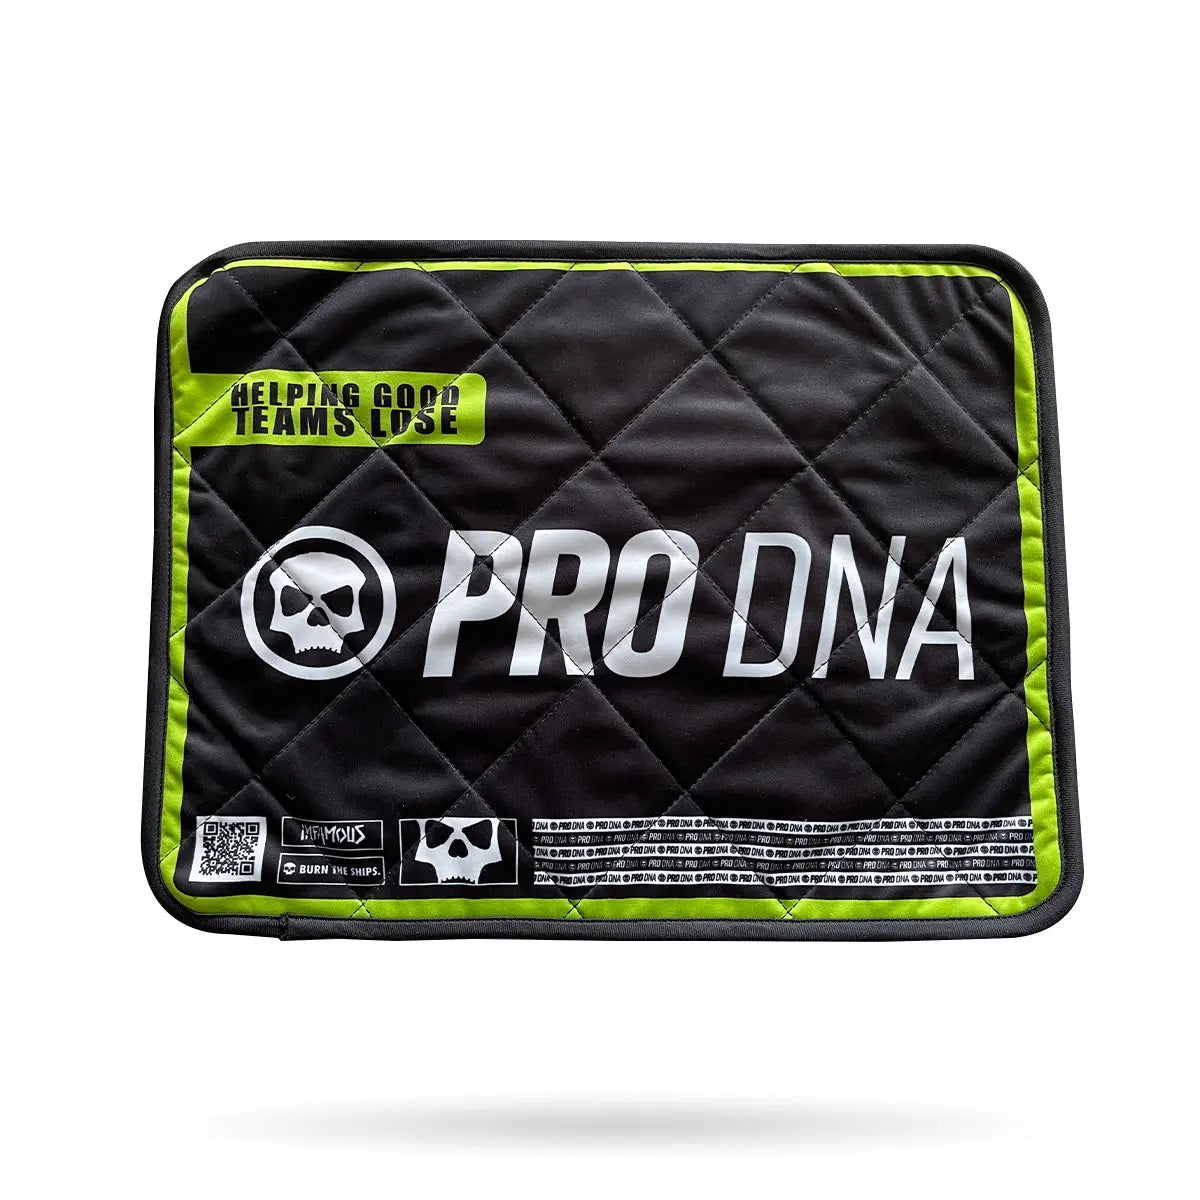 INFAMOUS MICROFIBER CLOTH - PRO DNA Infamous Paintball